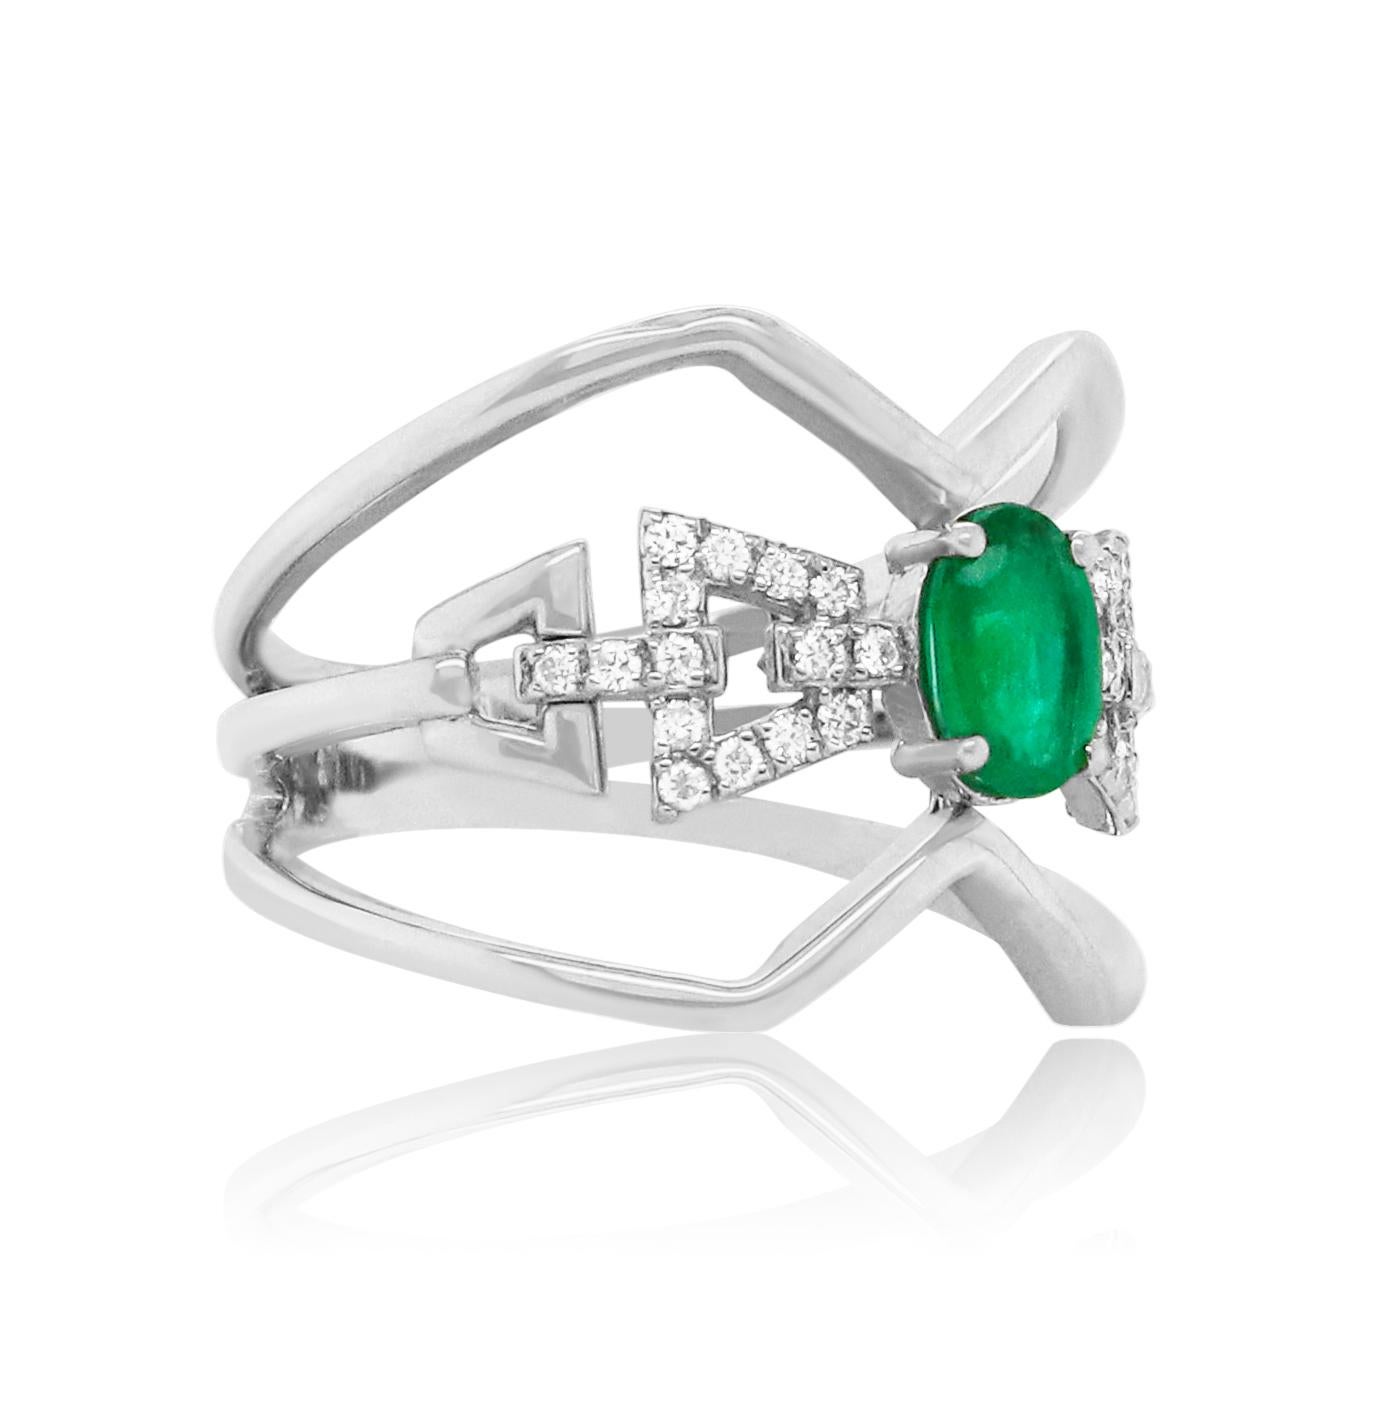 Material: 14k White Gold
Gemstones: 1 Oval Shaped Emerald at 0.42 Carats- Measuring 6 x 4 mm
Diamonds: 30 Brilliant Round White Diamonds at 0.14 Carats. SI Clarity / H-I Color. 

Fine one-of-a kind craftsmanship meets incredible quality in this